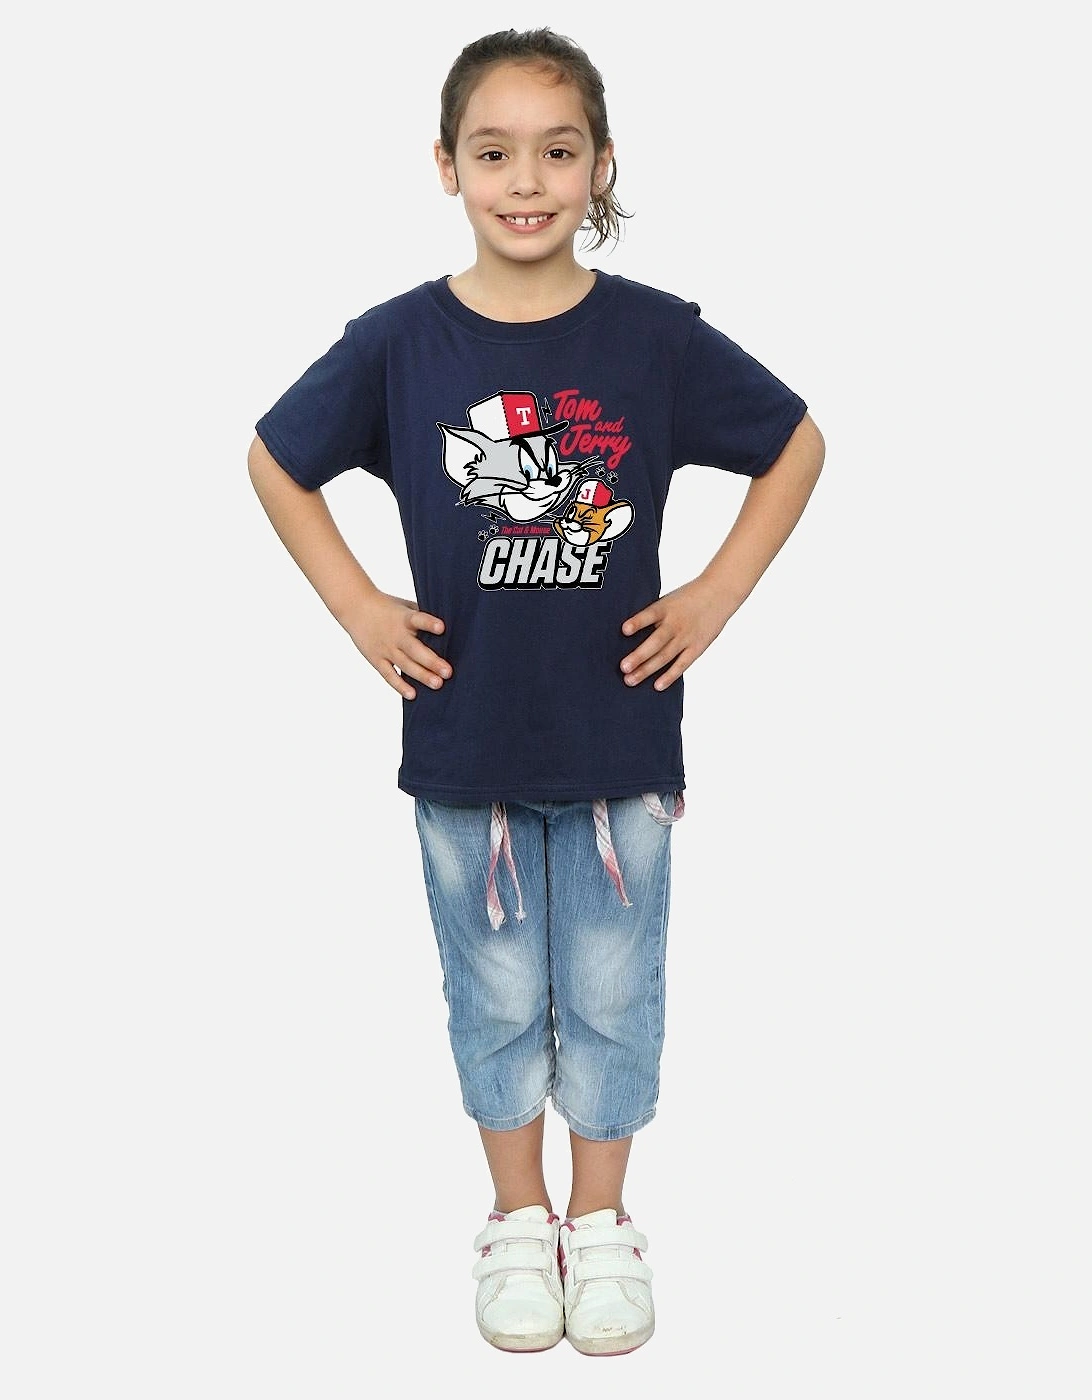 Tom And Jerry Girls Cat & Mouse Chase Cotton T-Shirt